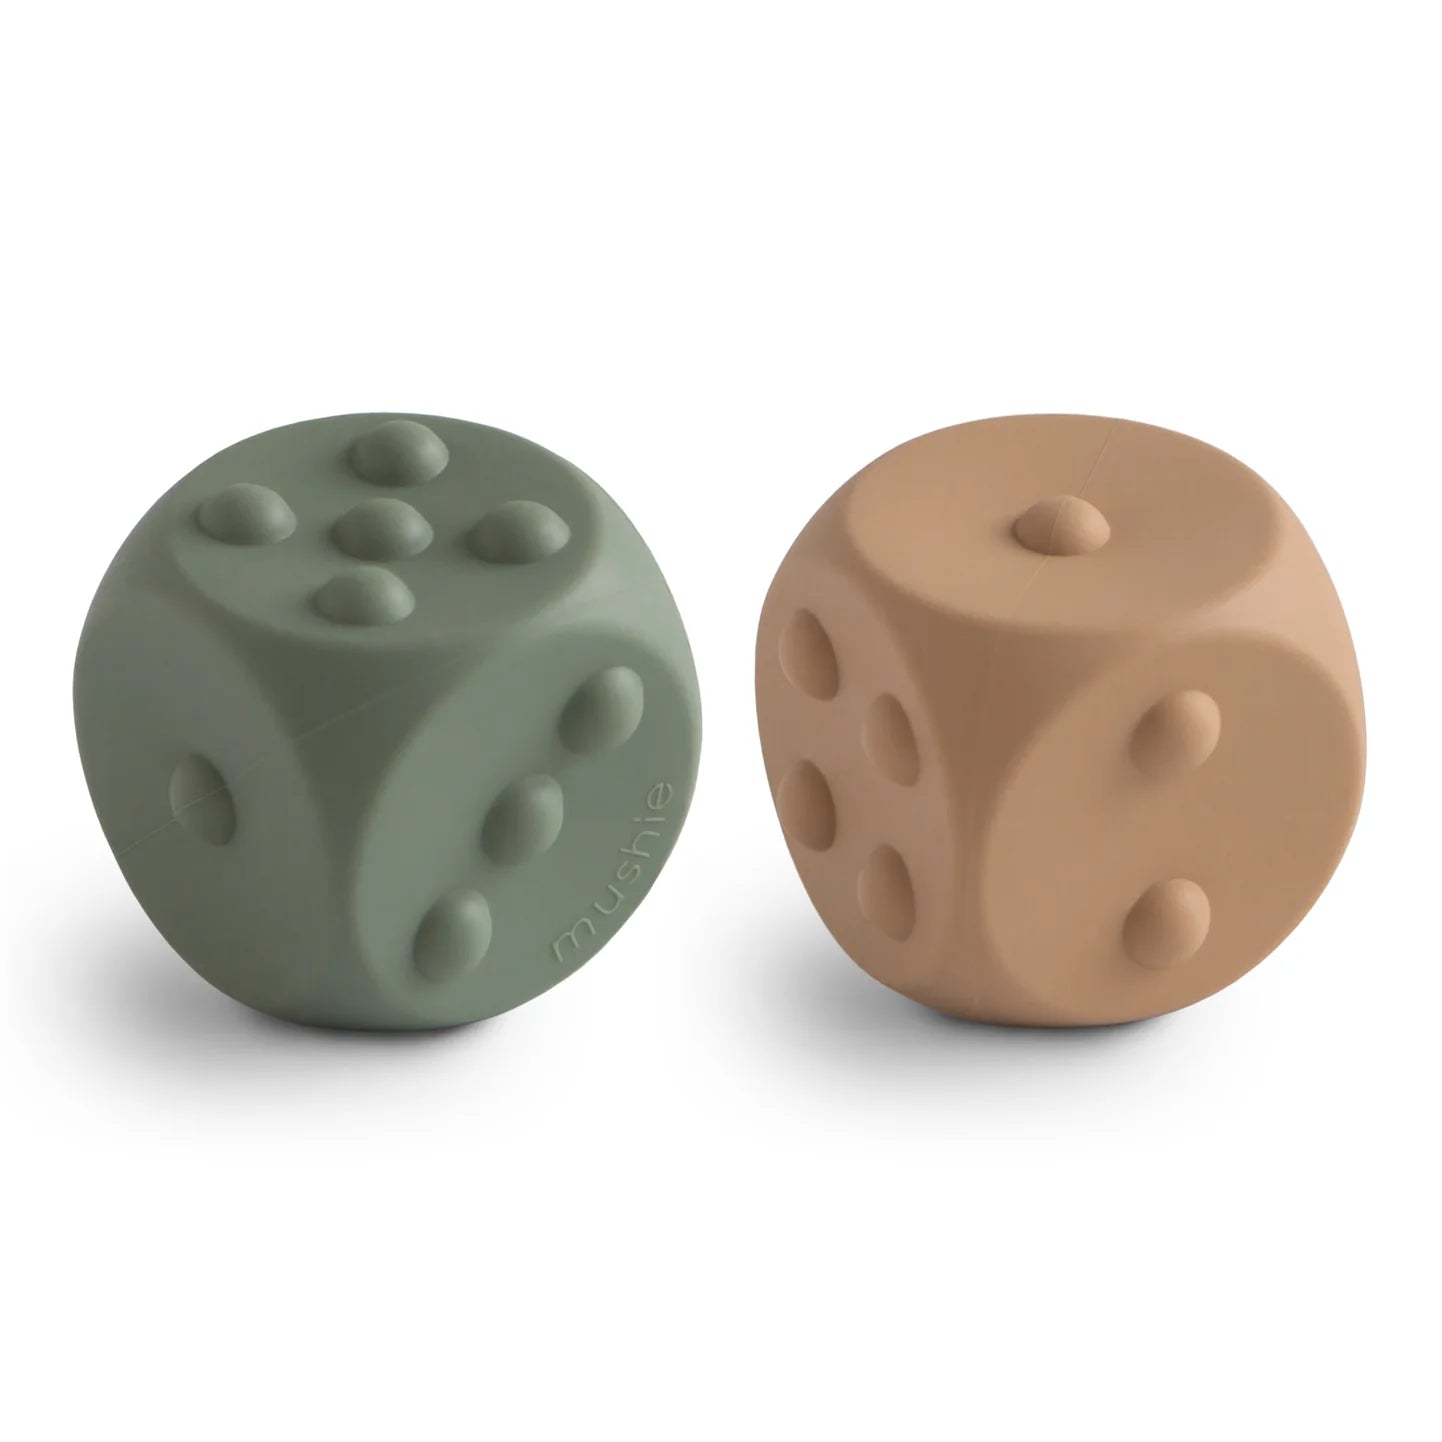 DICE PRESS TOY - DICE TYME/NSTURAL, MUSHIE